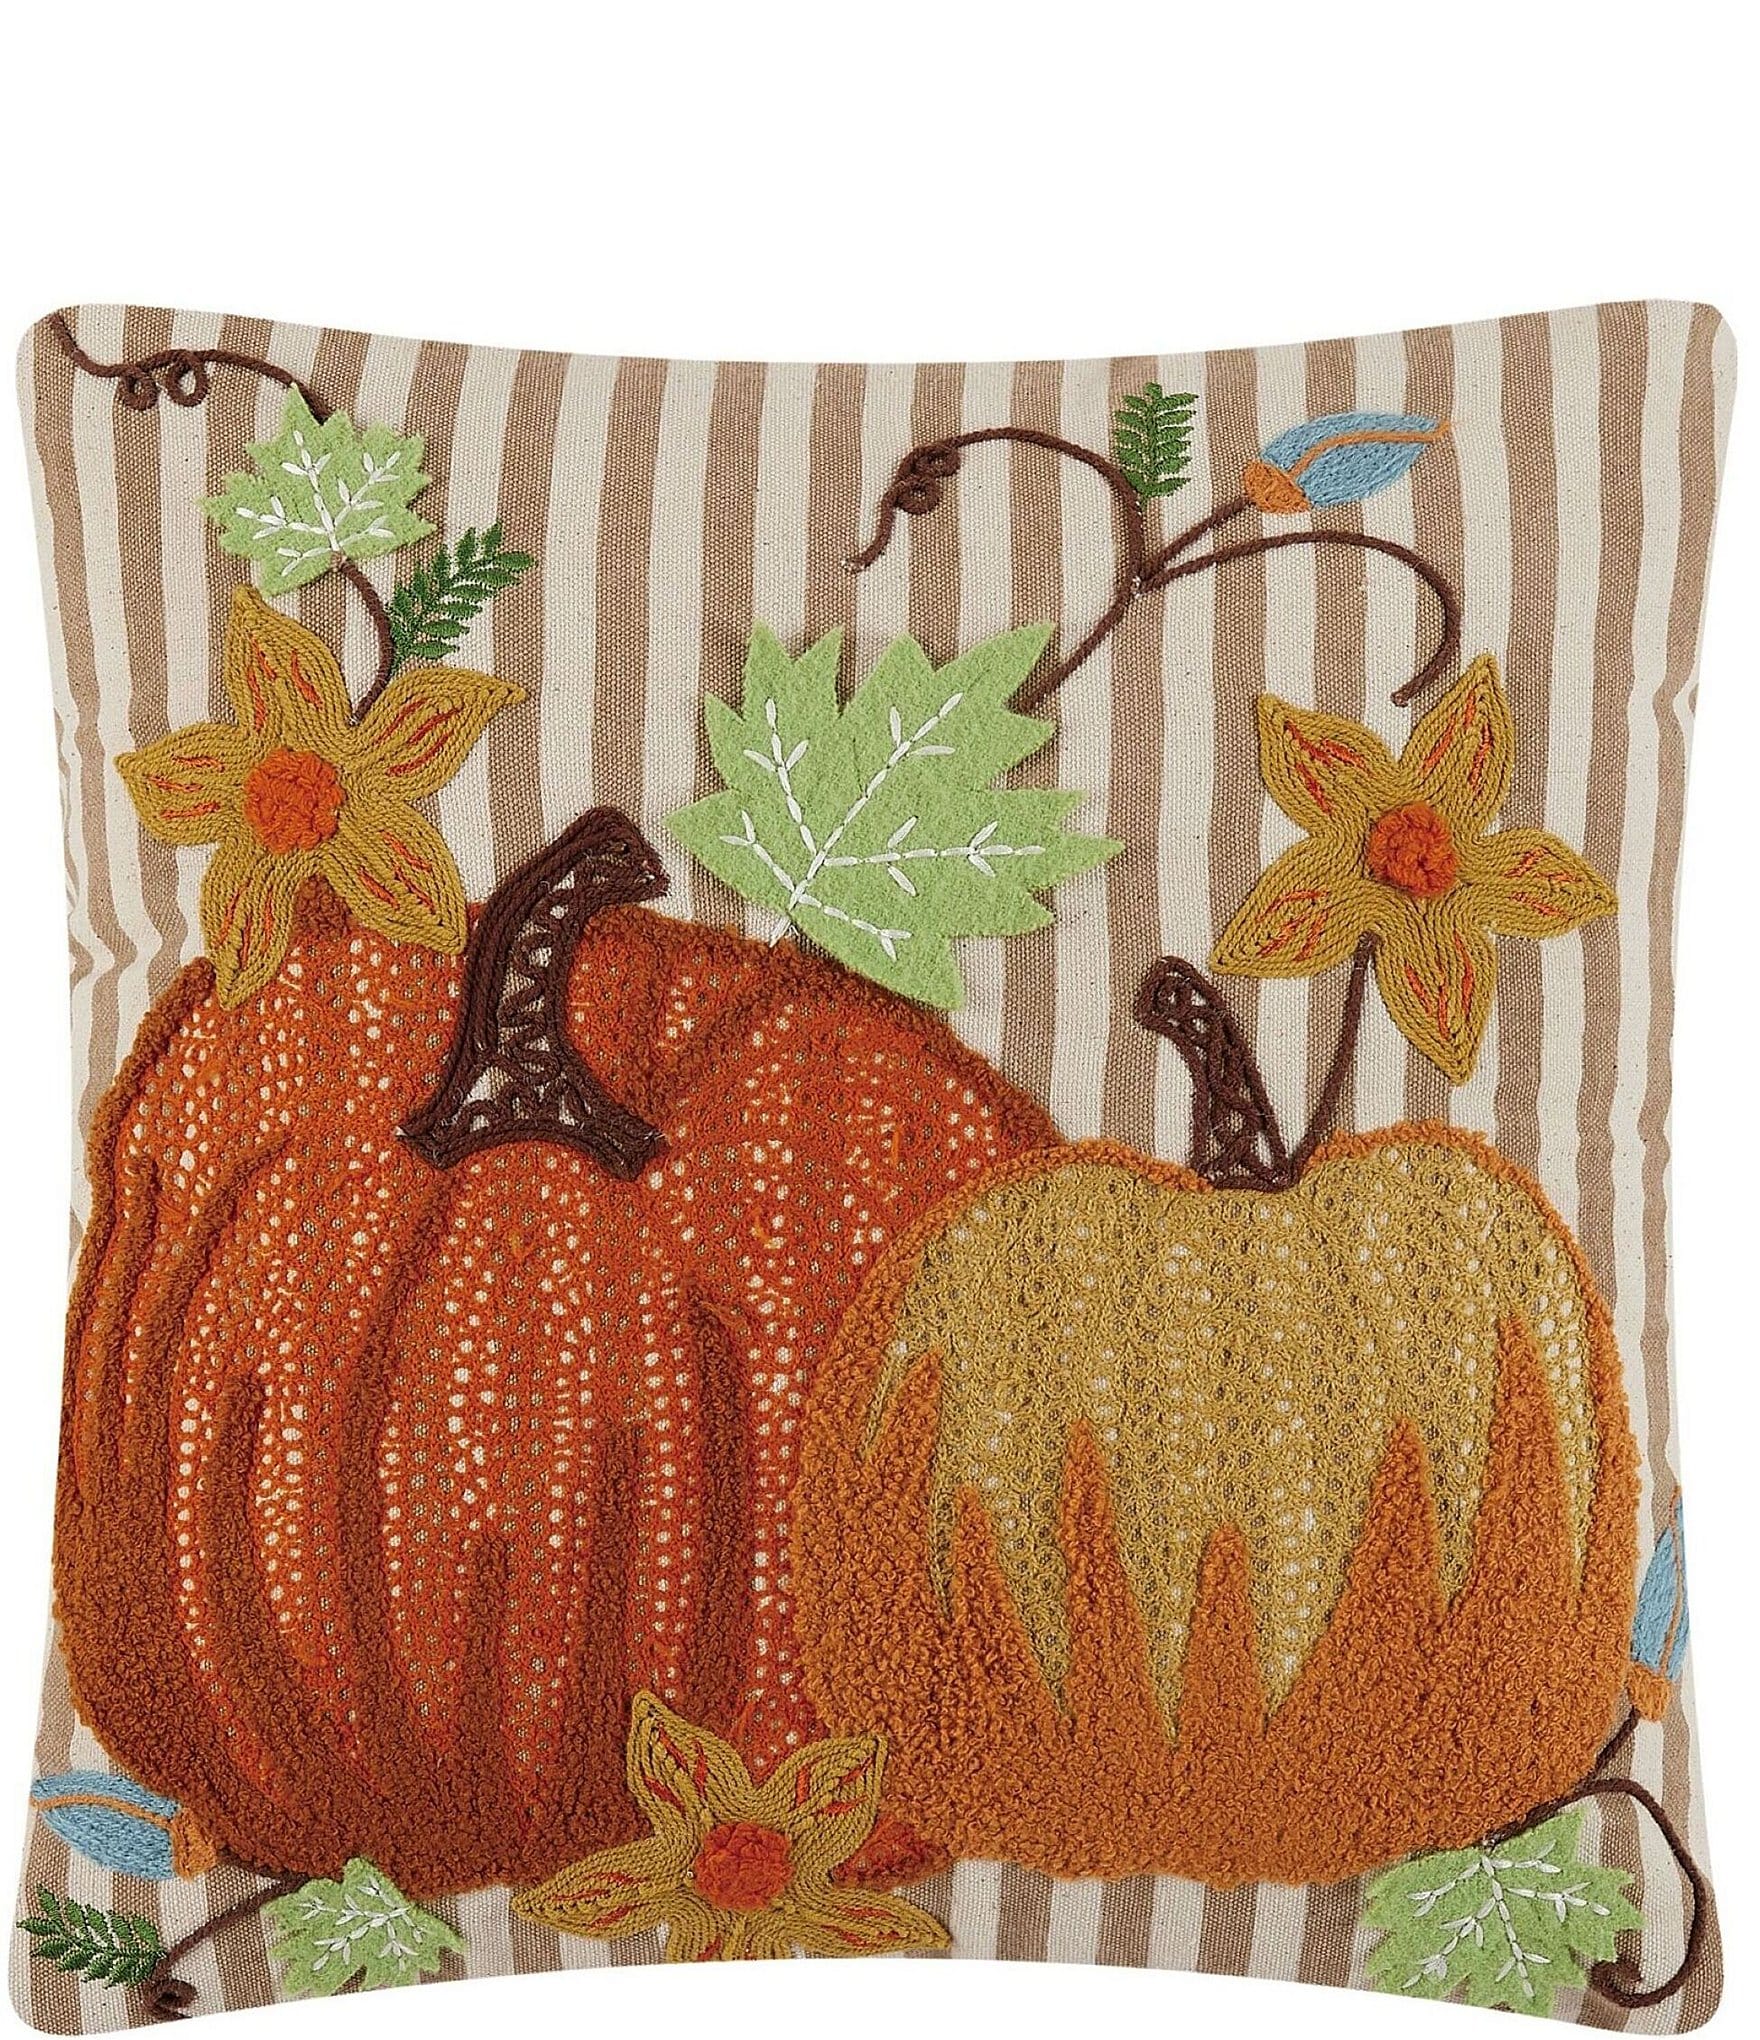 https://dimg.dillards.com/is/image/DillardsZoom/zoom/peking-handicraft-festive-fall-collection-pair-of-pumpkins-embroidered-square-pillow/00000000_zi_24af87dd-c88d-4f17-b50f-1ed9951feab1.jpg